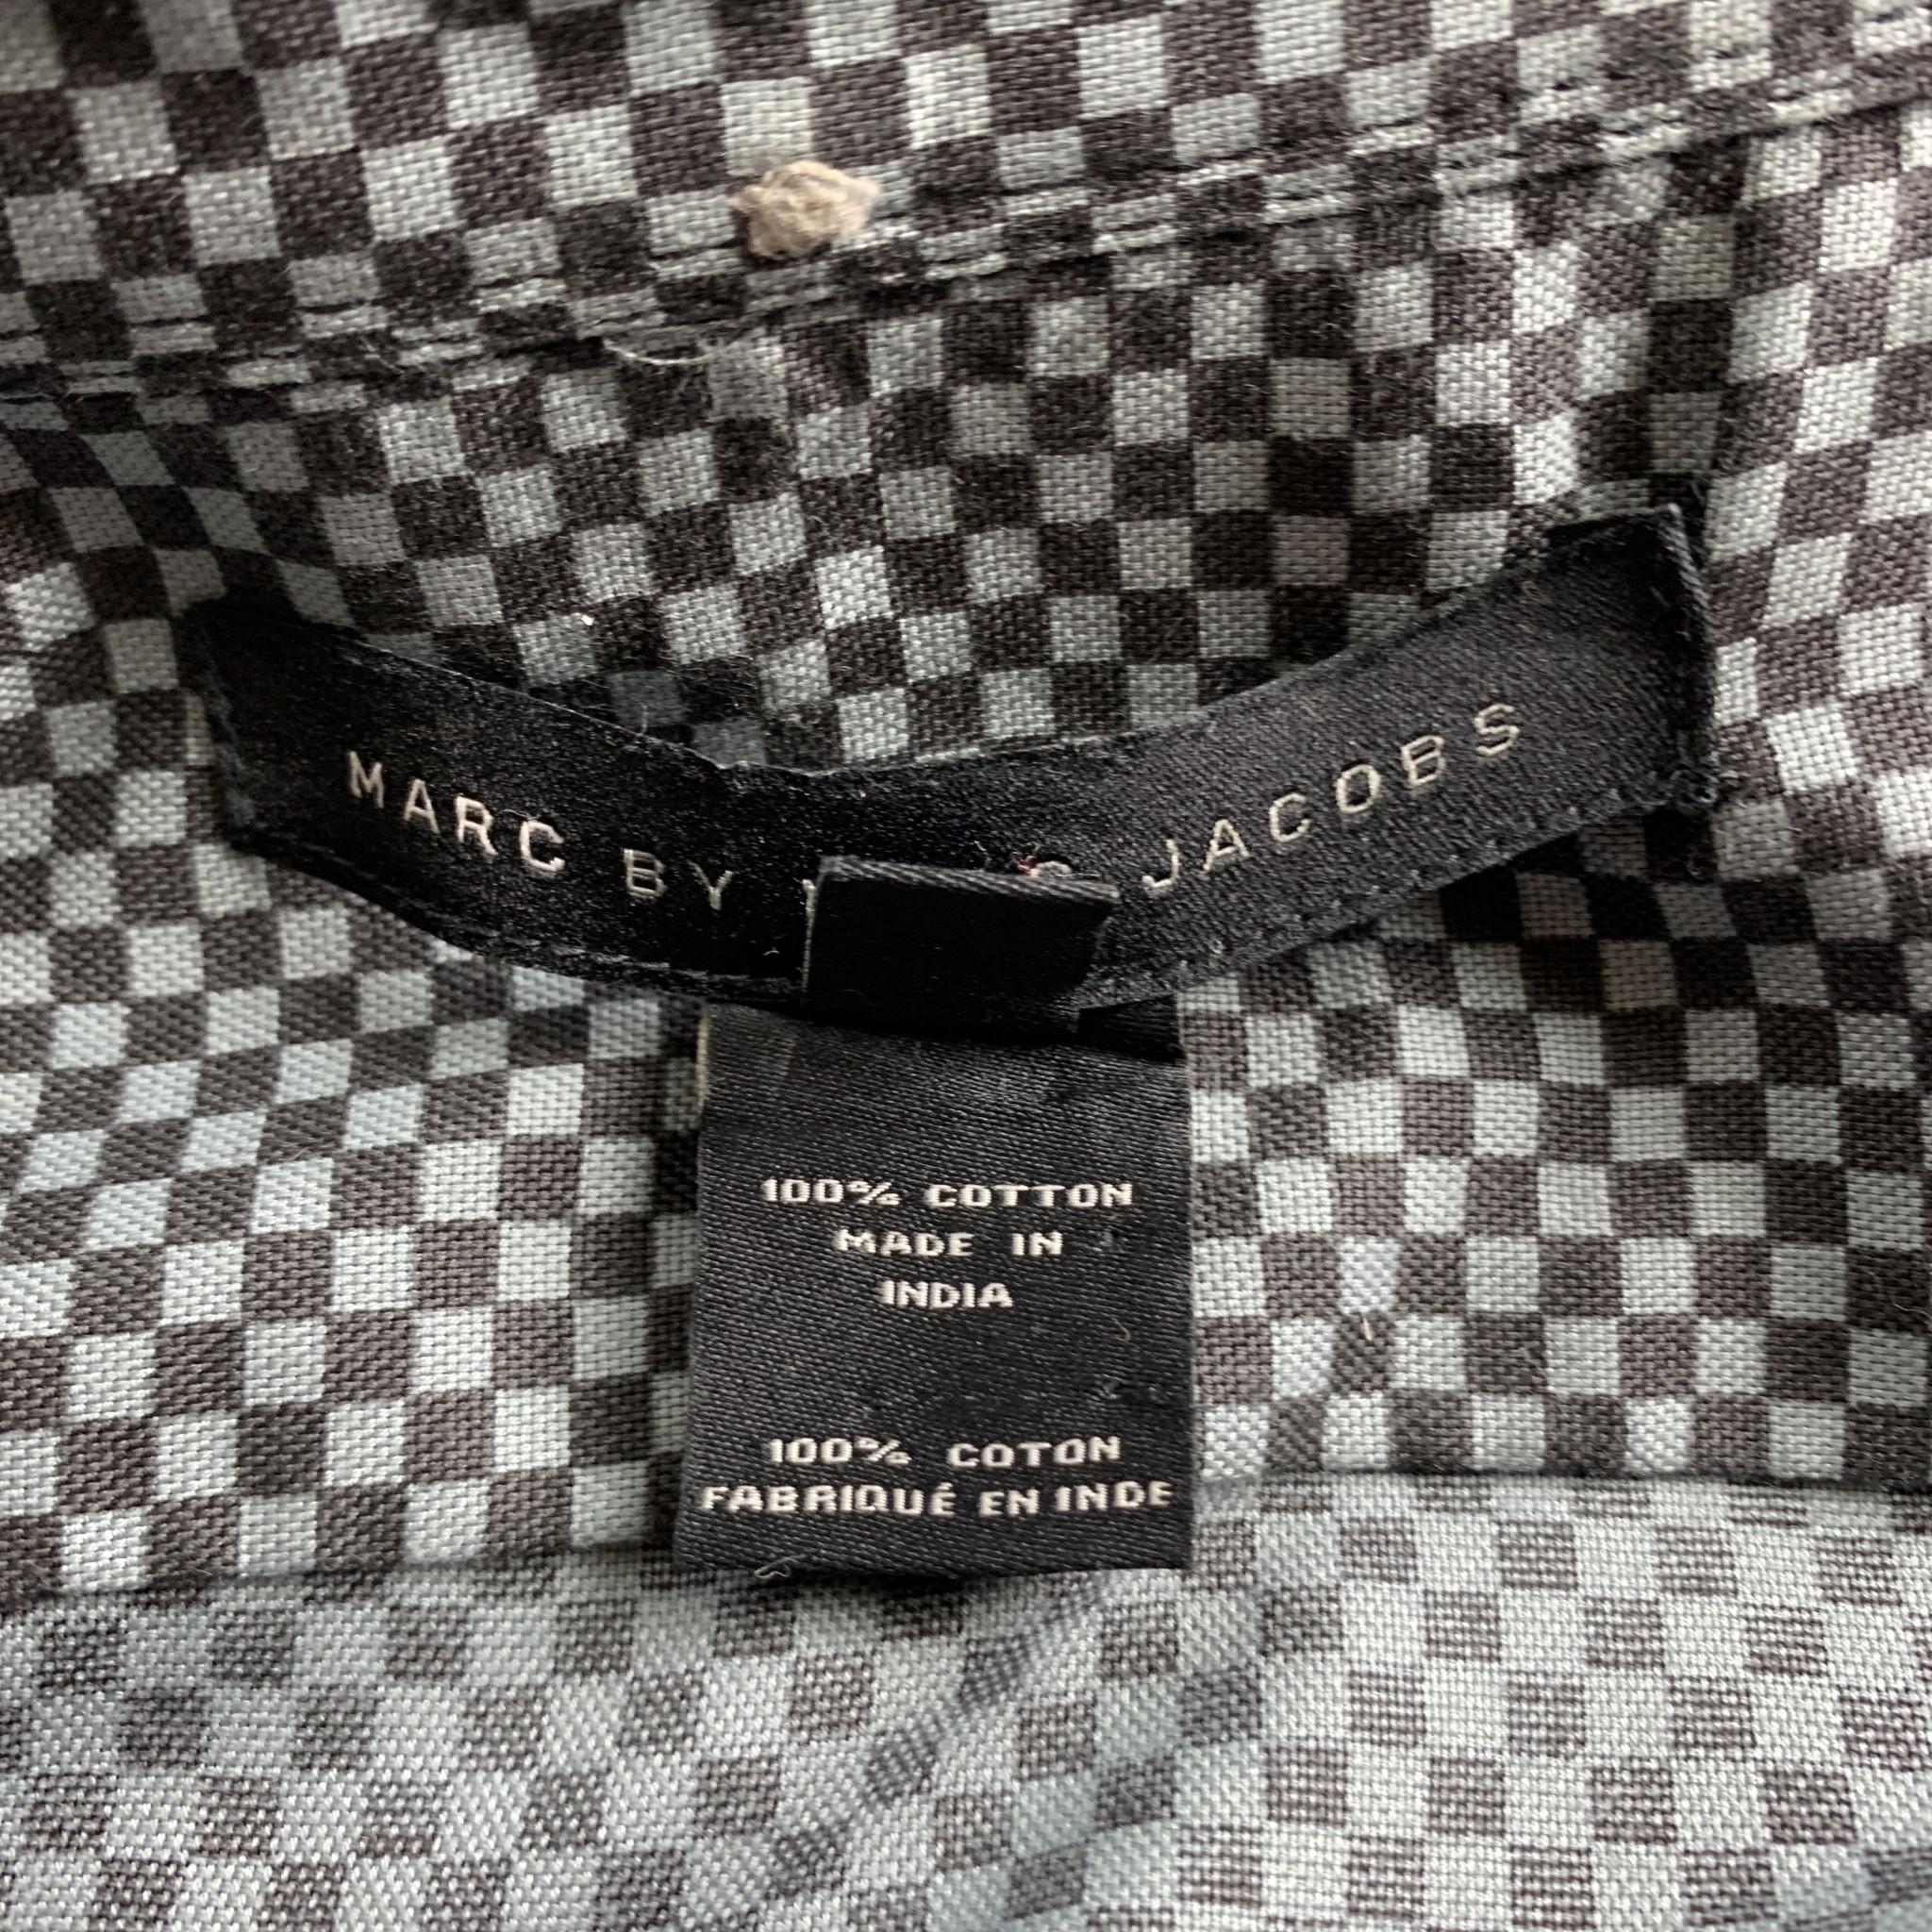 MARC by MARC JACOBS Size S Gray & Black Checkered Cotton Long Sleeve Shirt 2